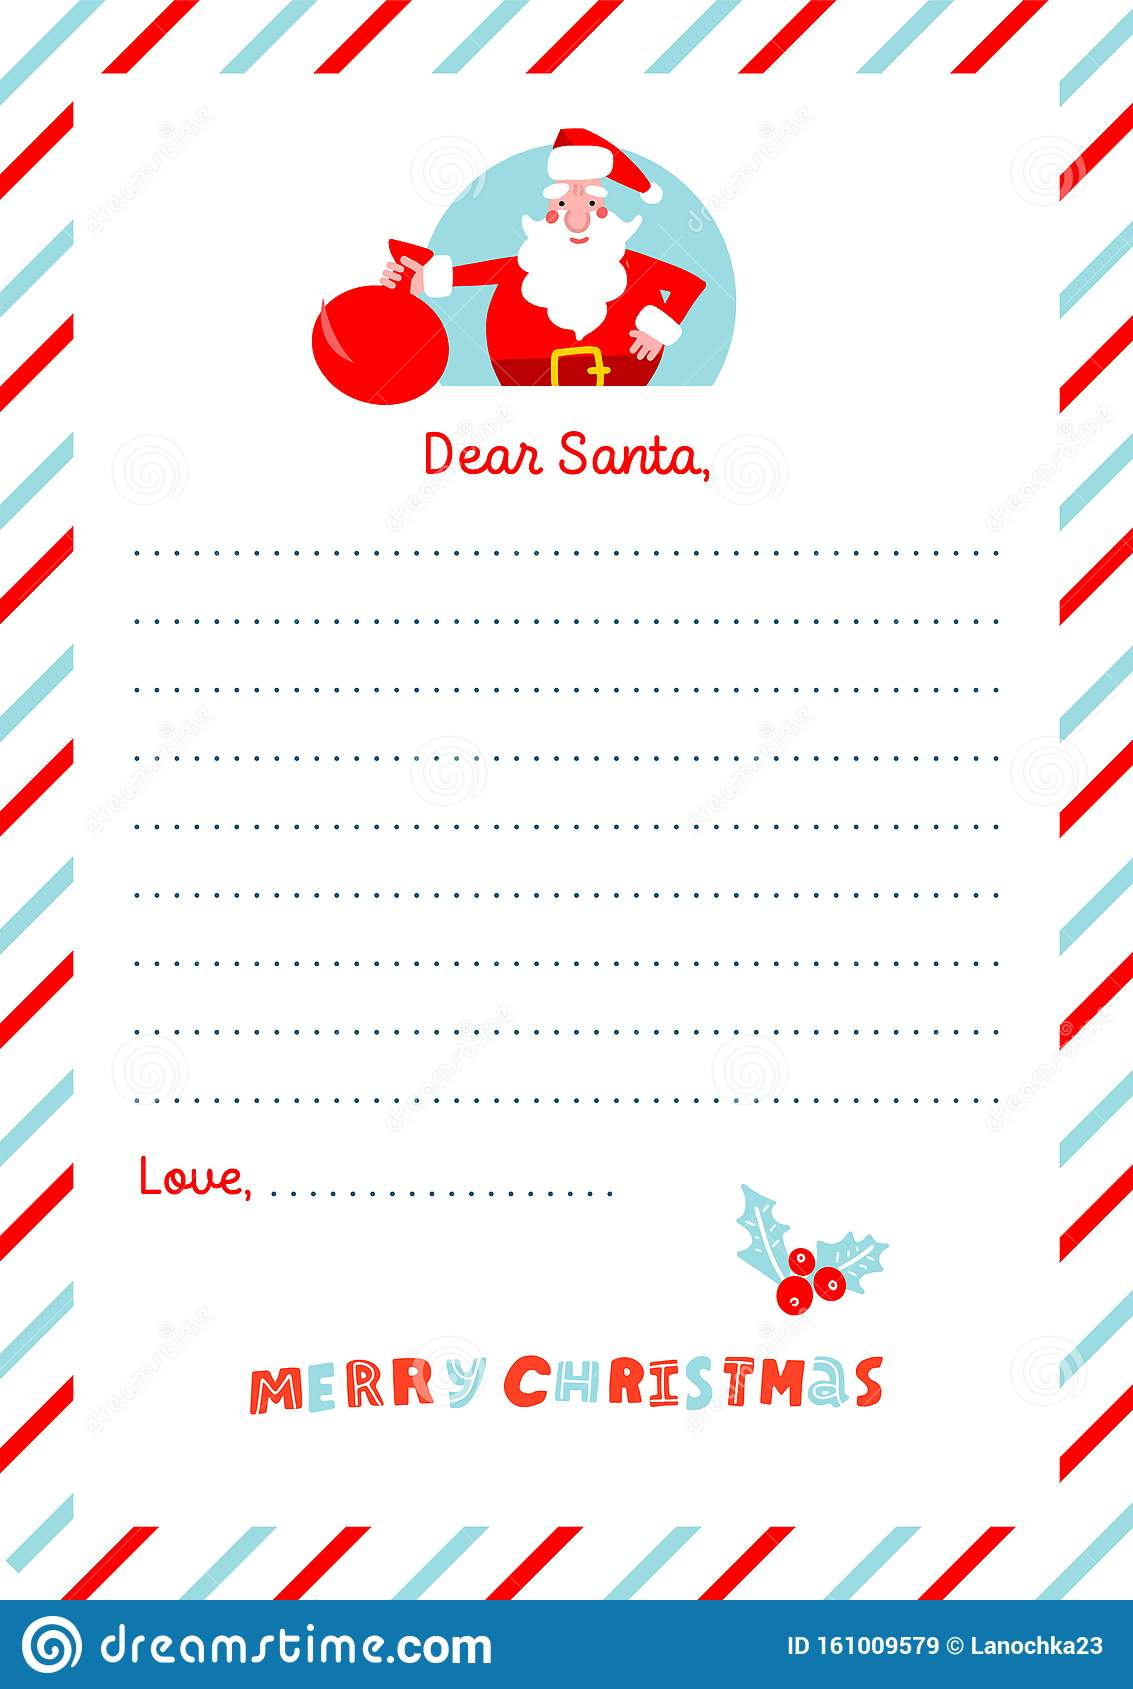 A4 Christmas Letter To Santa Claus Template Decorated